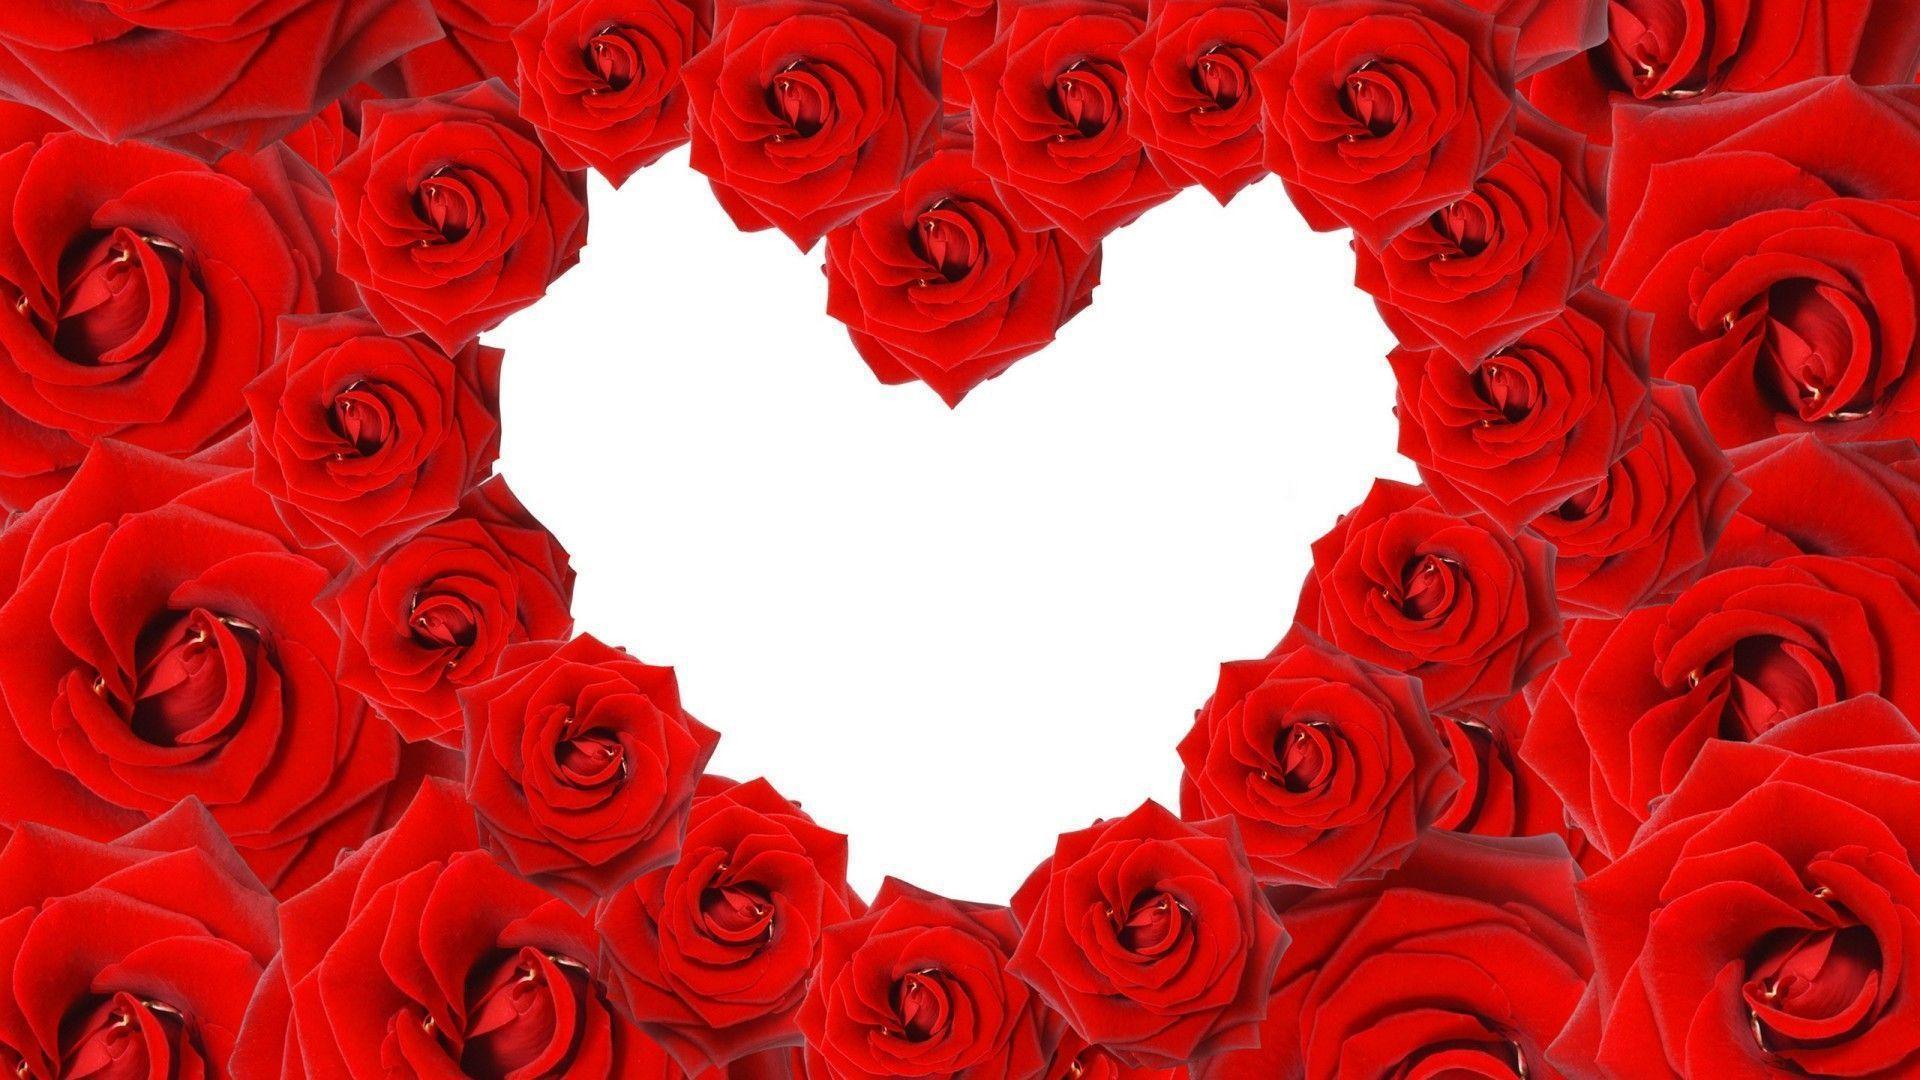 Red roses in a heart shape on white background wallpaper